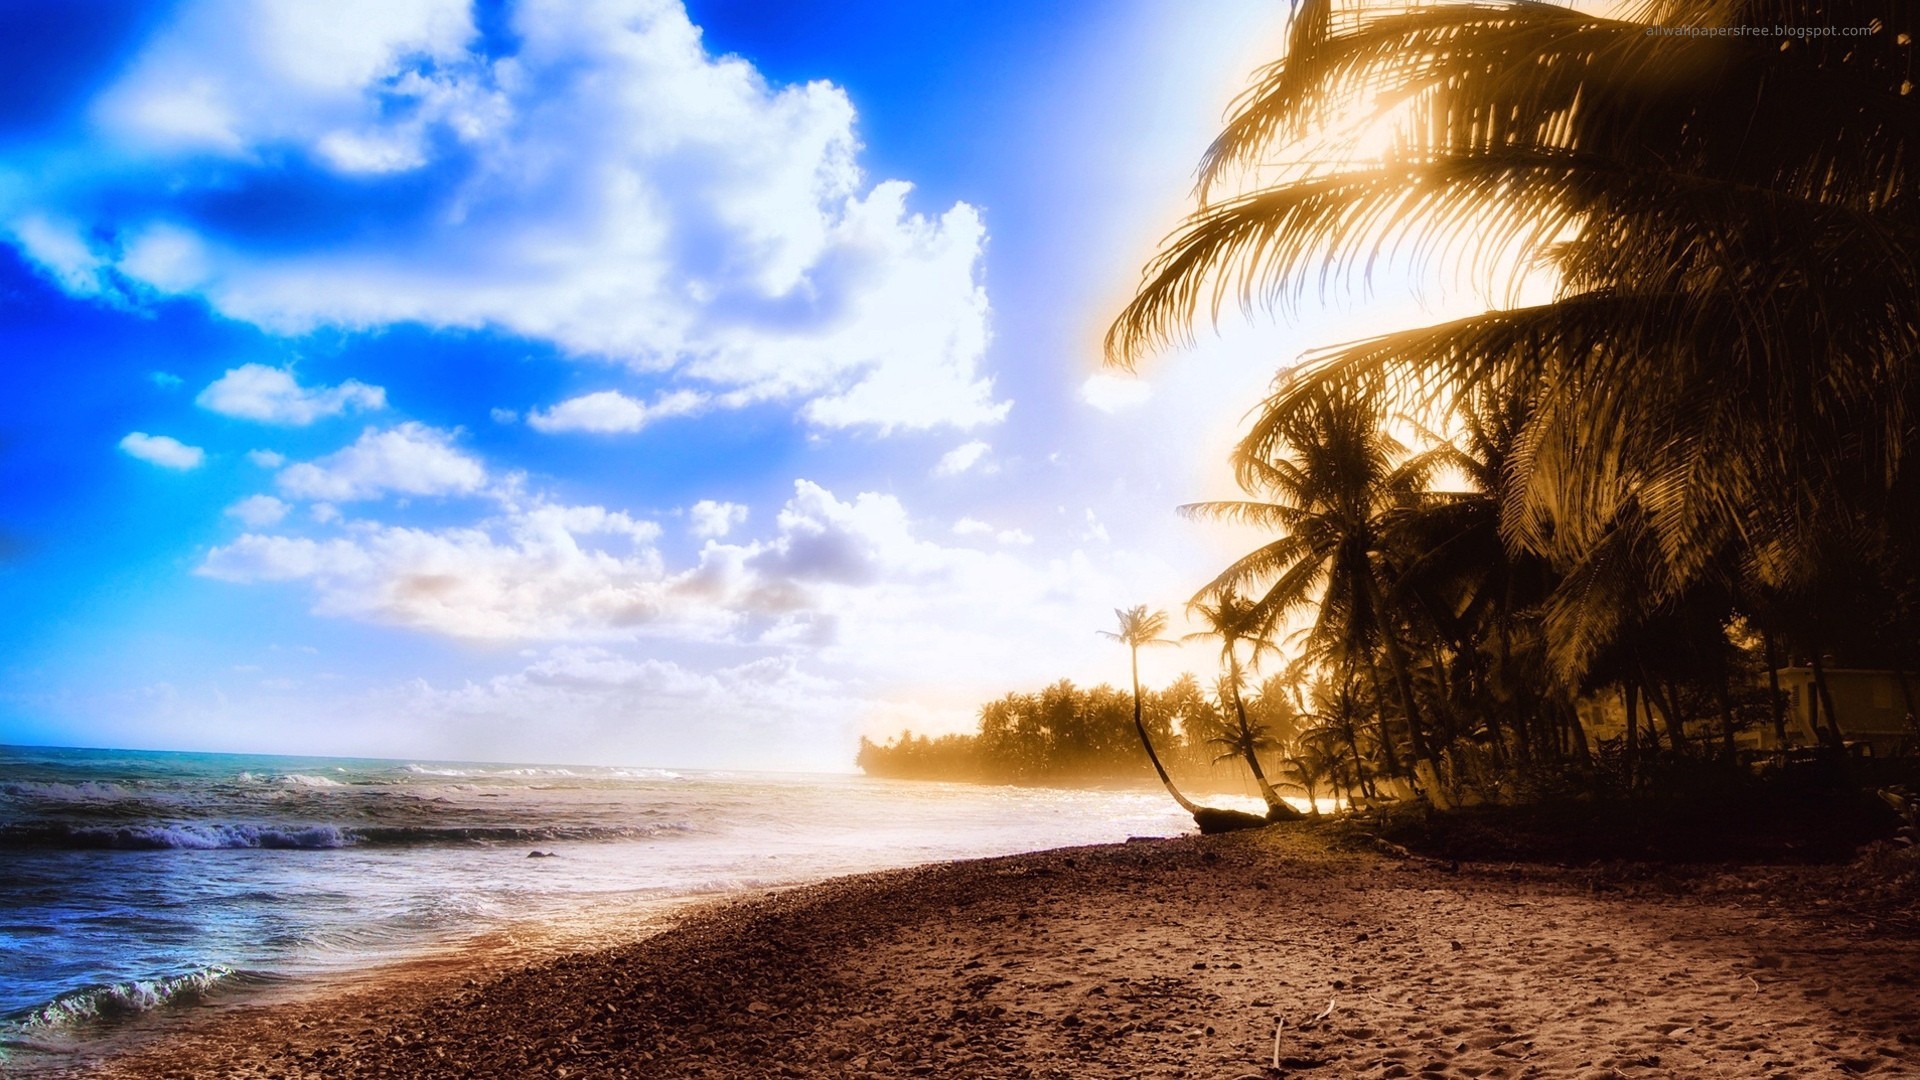 ocean, Clouds, Beach, Sand, Trees, Tropical, Sunlight, Palm, Trees, Skyscapes Wallpaper